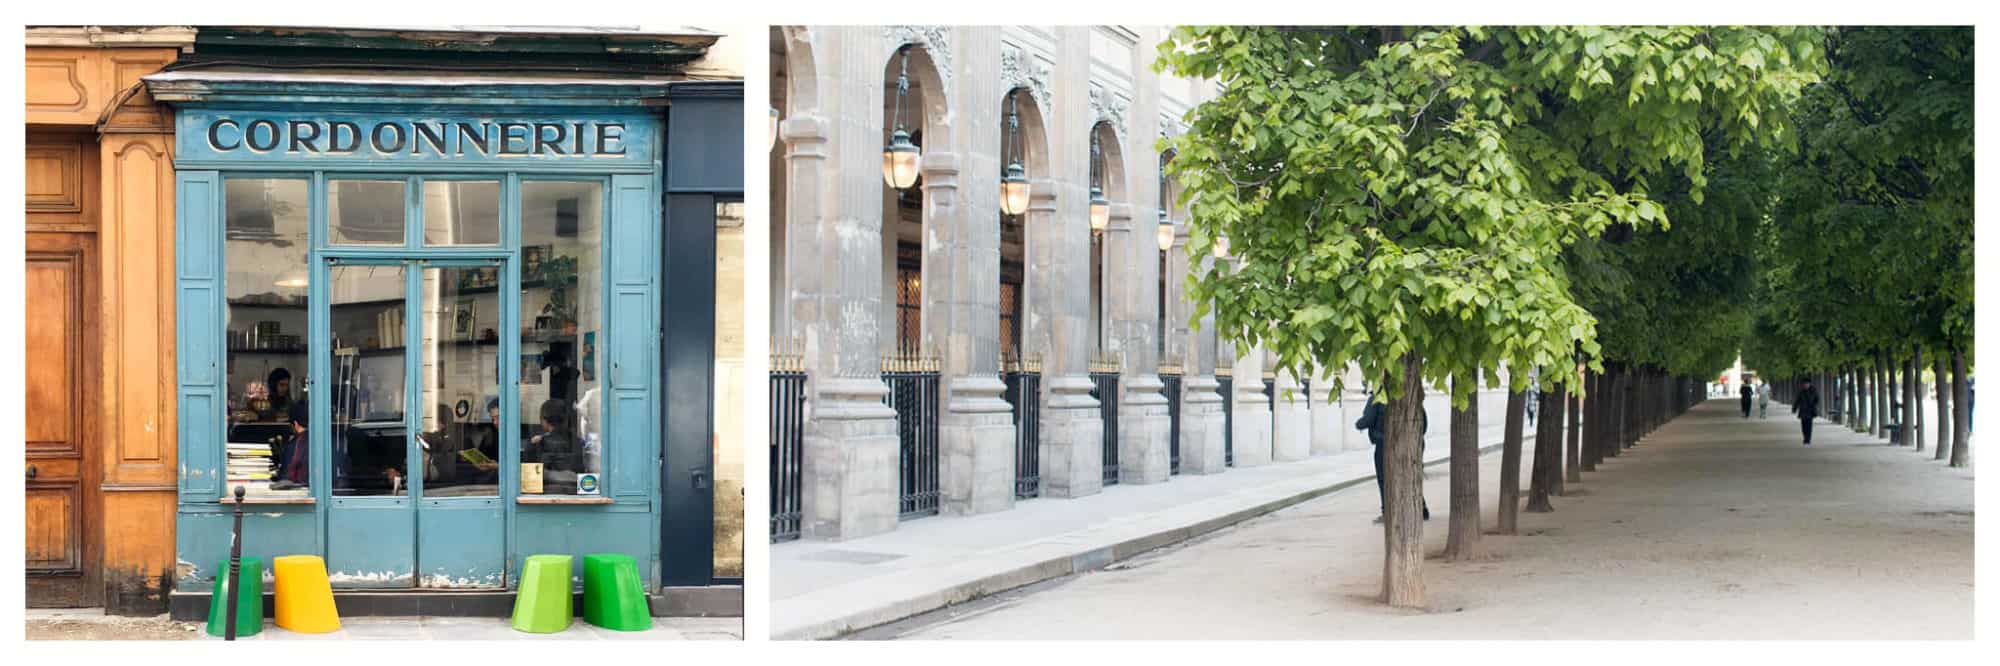 On left: The iconic facade of the Boot Café, in Paris' 3rd arrondissement, greets customers with its cheery blue  paint and old-fashioned sign, "Cordonnerie," a nod to the space's history as a cobbler shop. On right: The lush trees of the Palais Royal garden shade those on a stroll. 